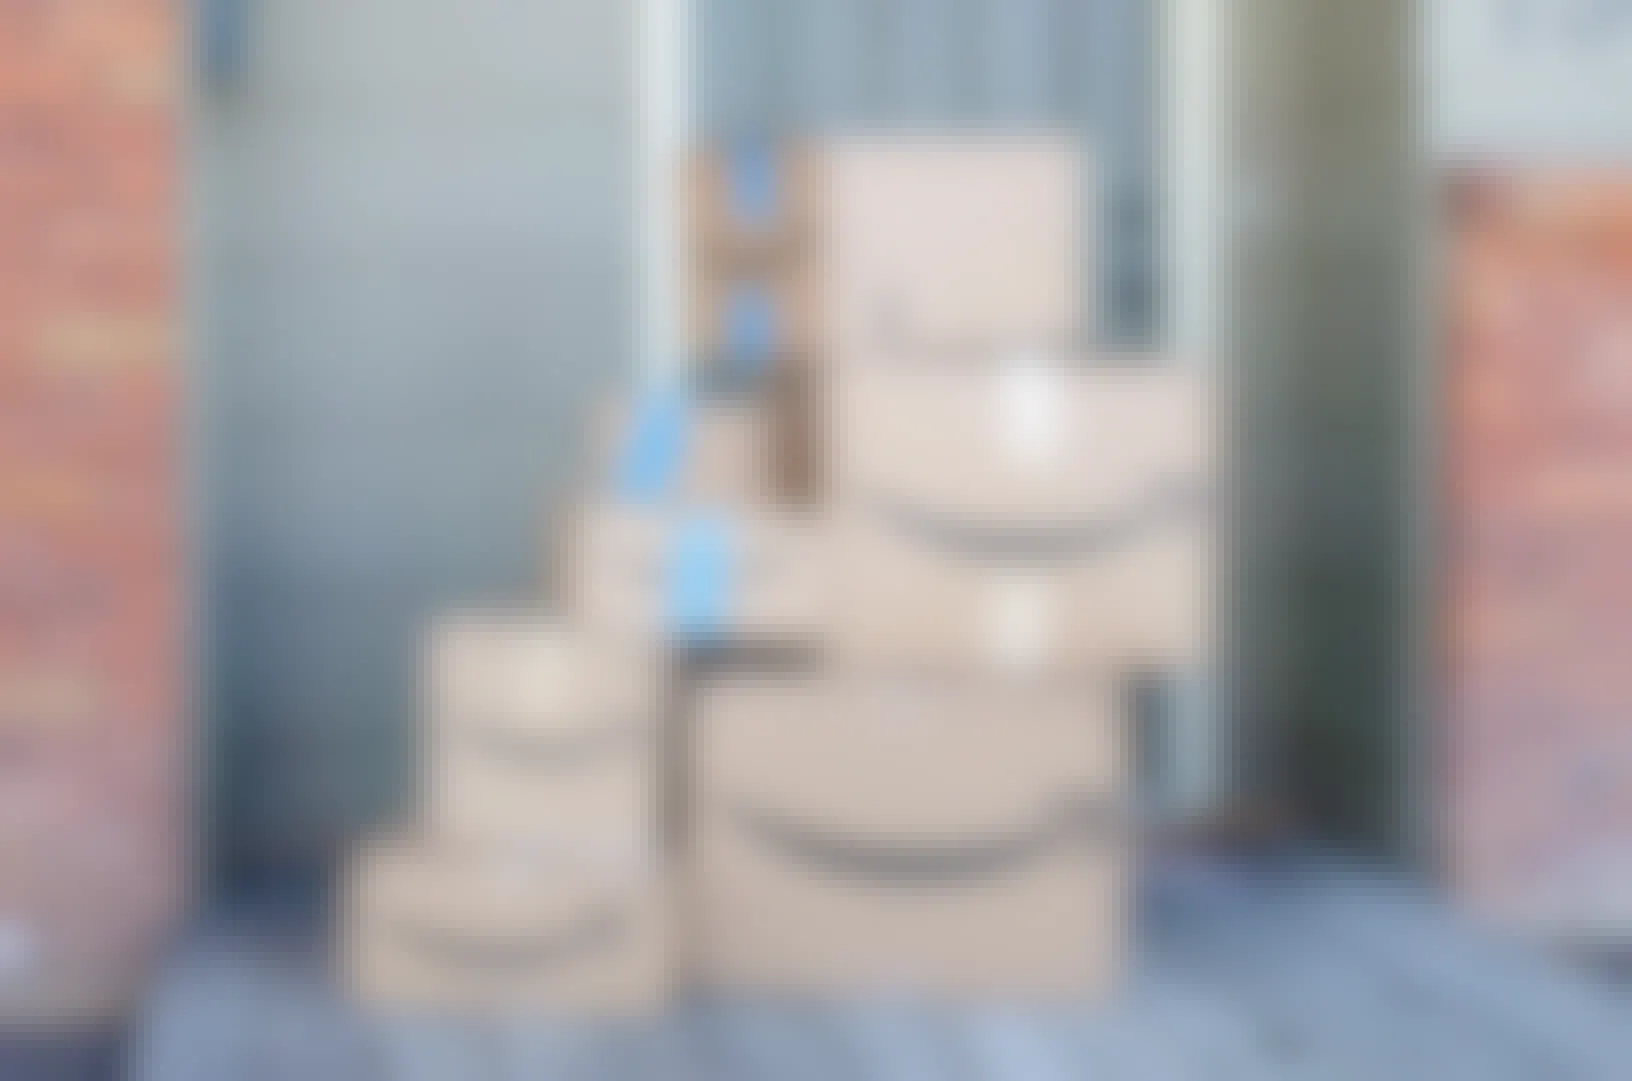 amazon boxes stacked on porch